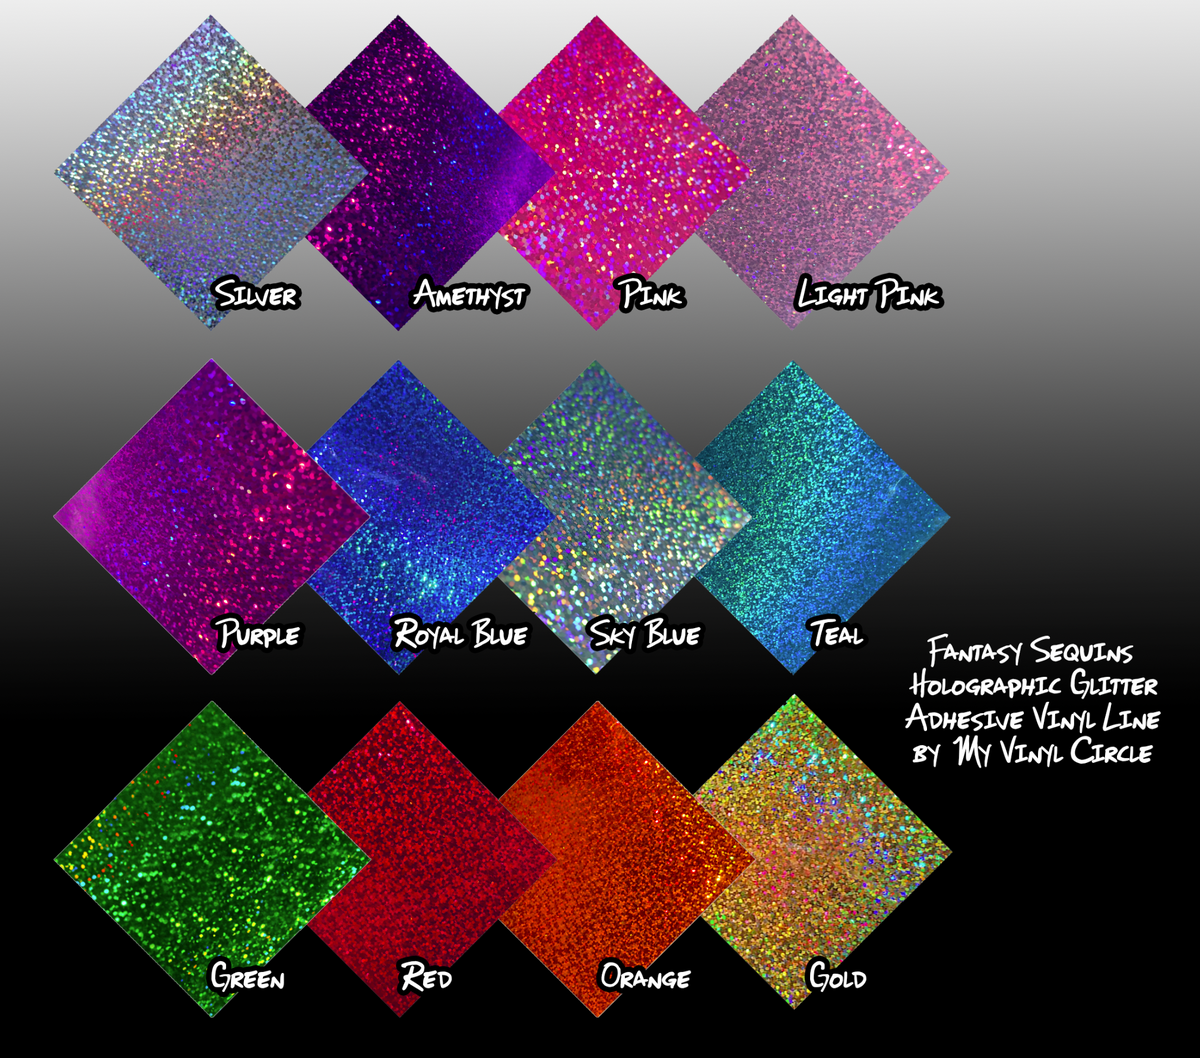 22 Assorted Sheets of ColorSpark Glitter Adhesive Vinyl